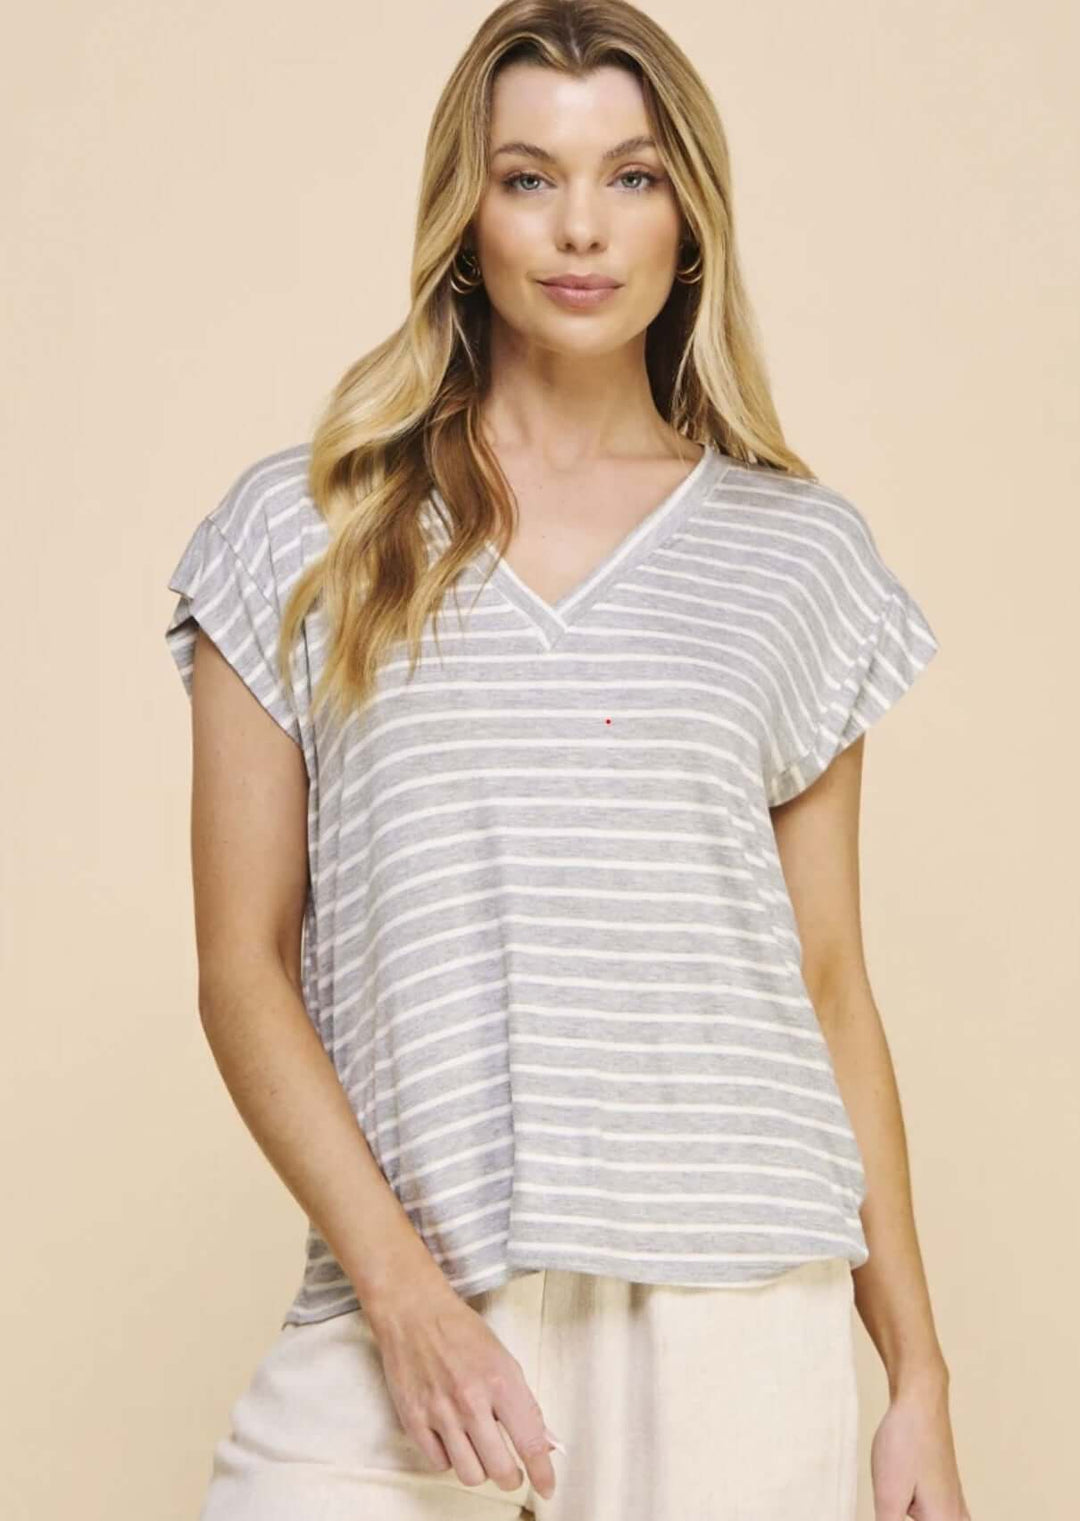 USA Made Women's Super Soft Striped V-Neck Relaxed Fit Tee in Grey & White Stripes   | Classy Cozy Cool Made in America Clothing Boutique